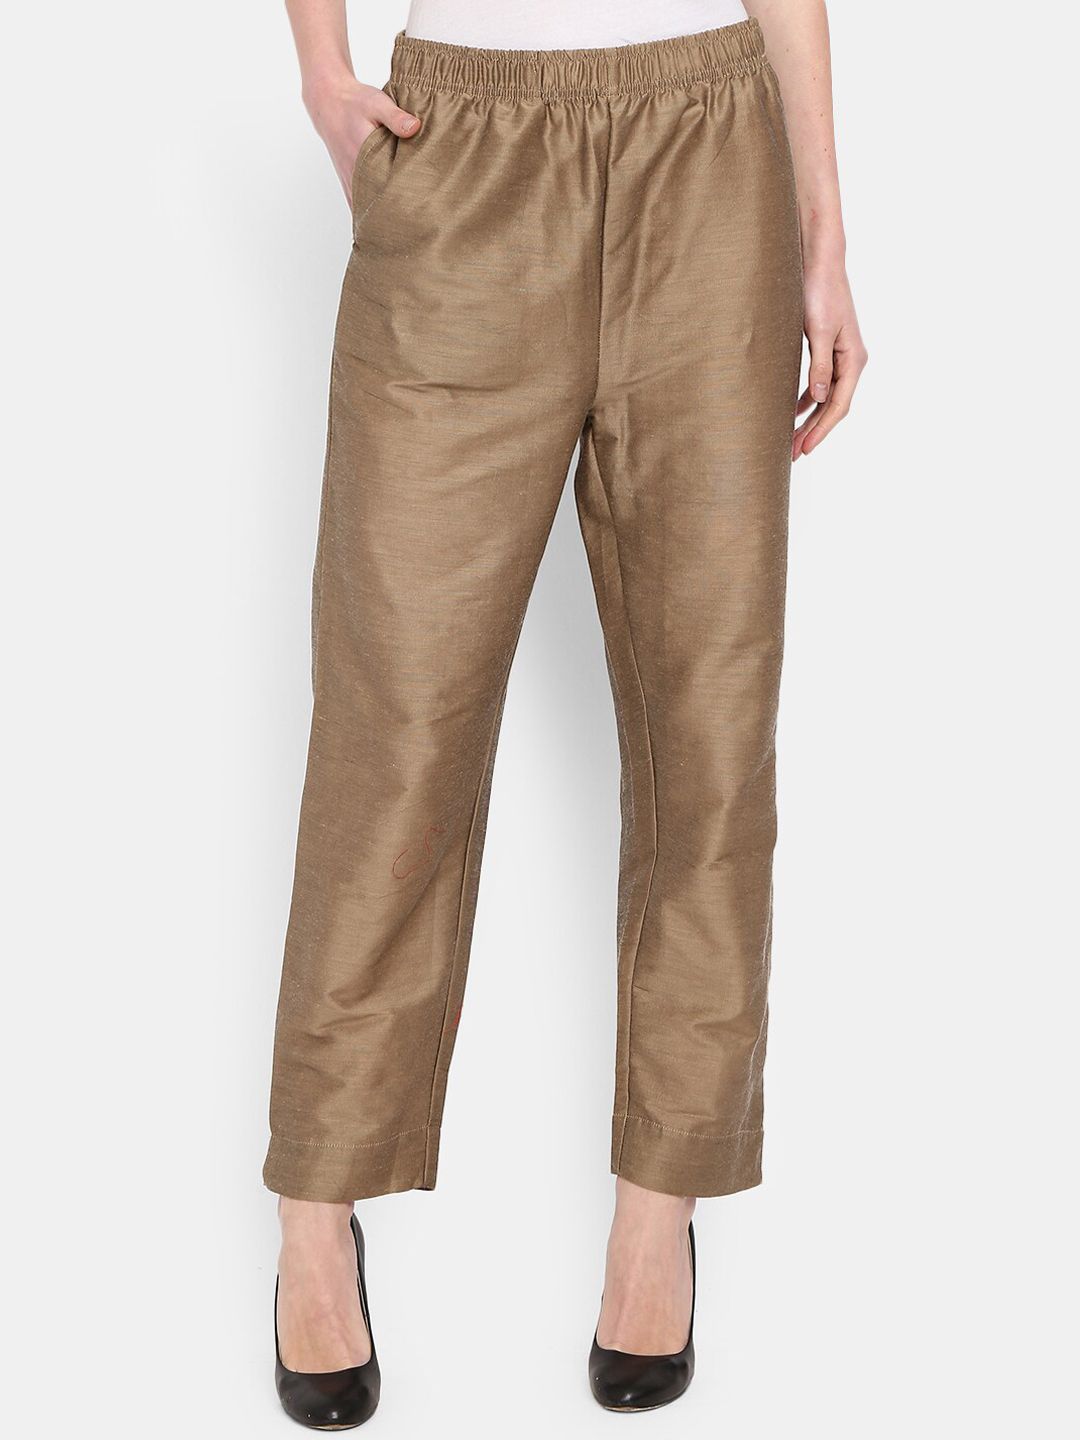 V-Mart Women Gold-Toned Trousers Price in India